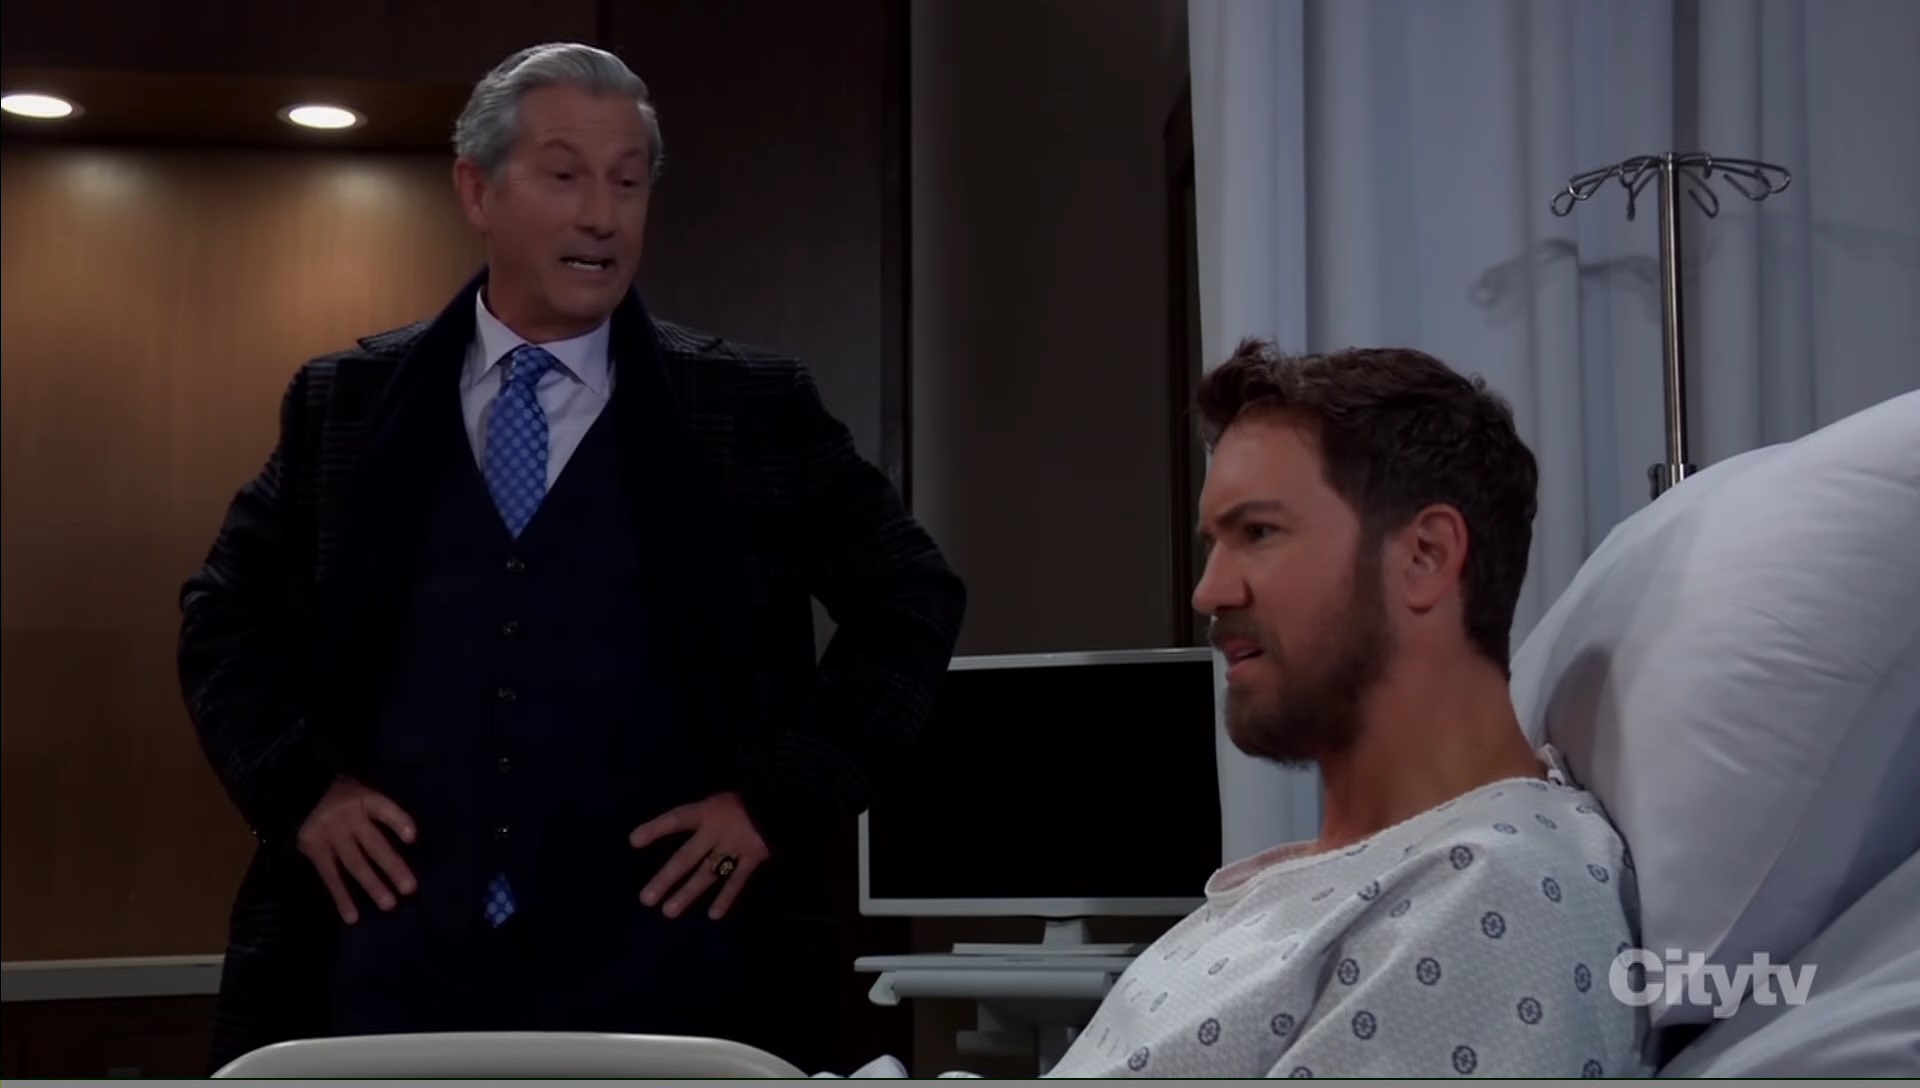 Victor relishes telling truth maxie lied general hospital